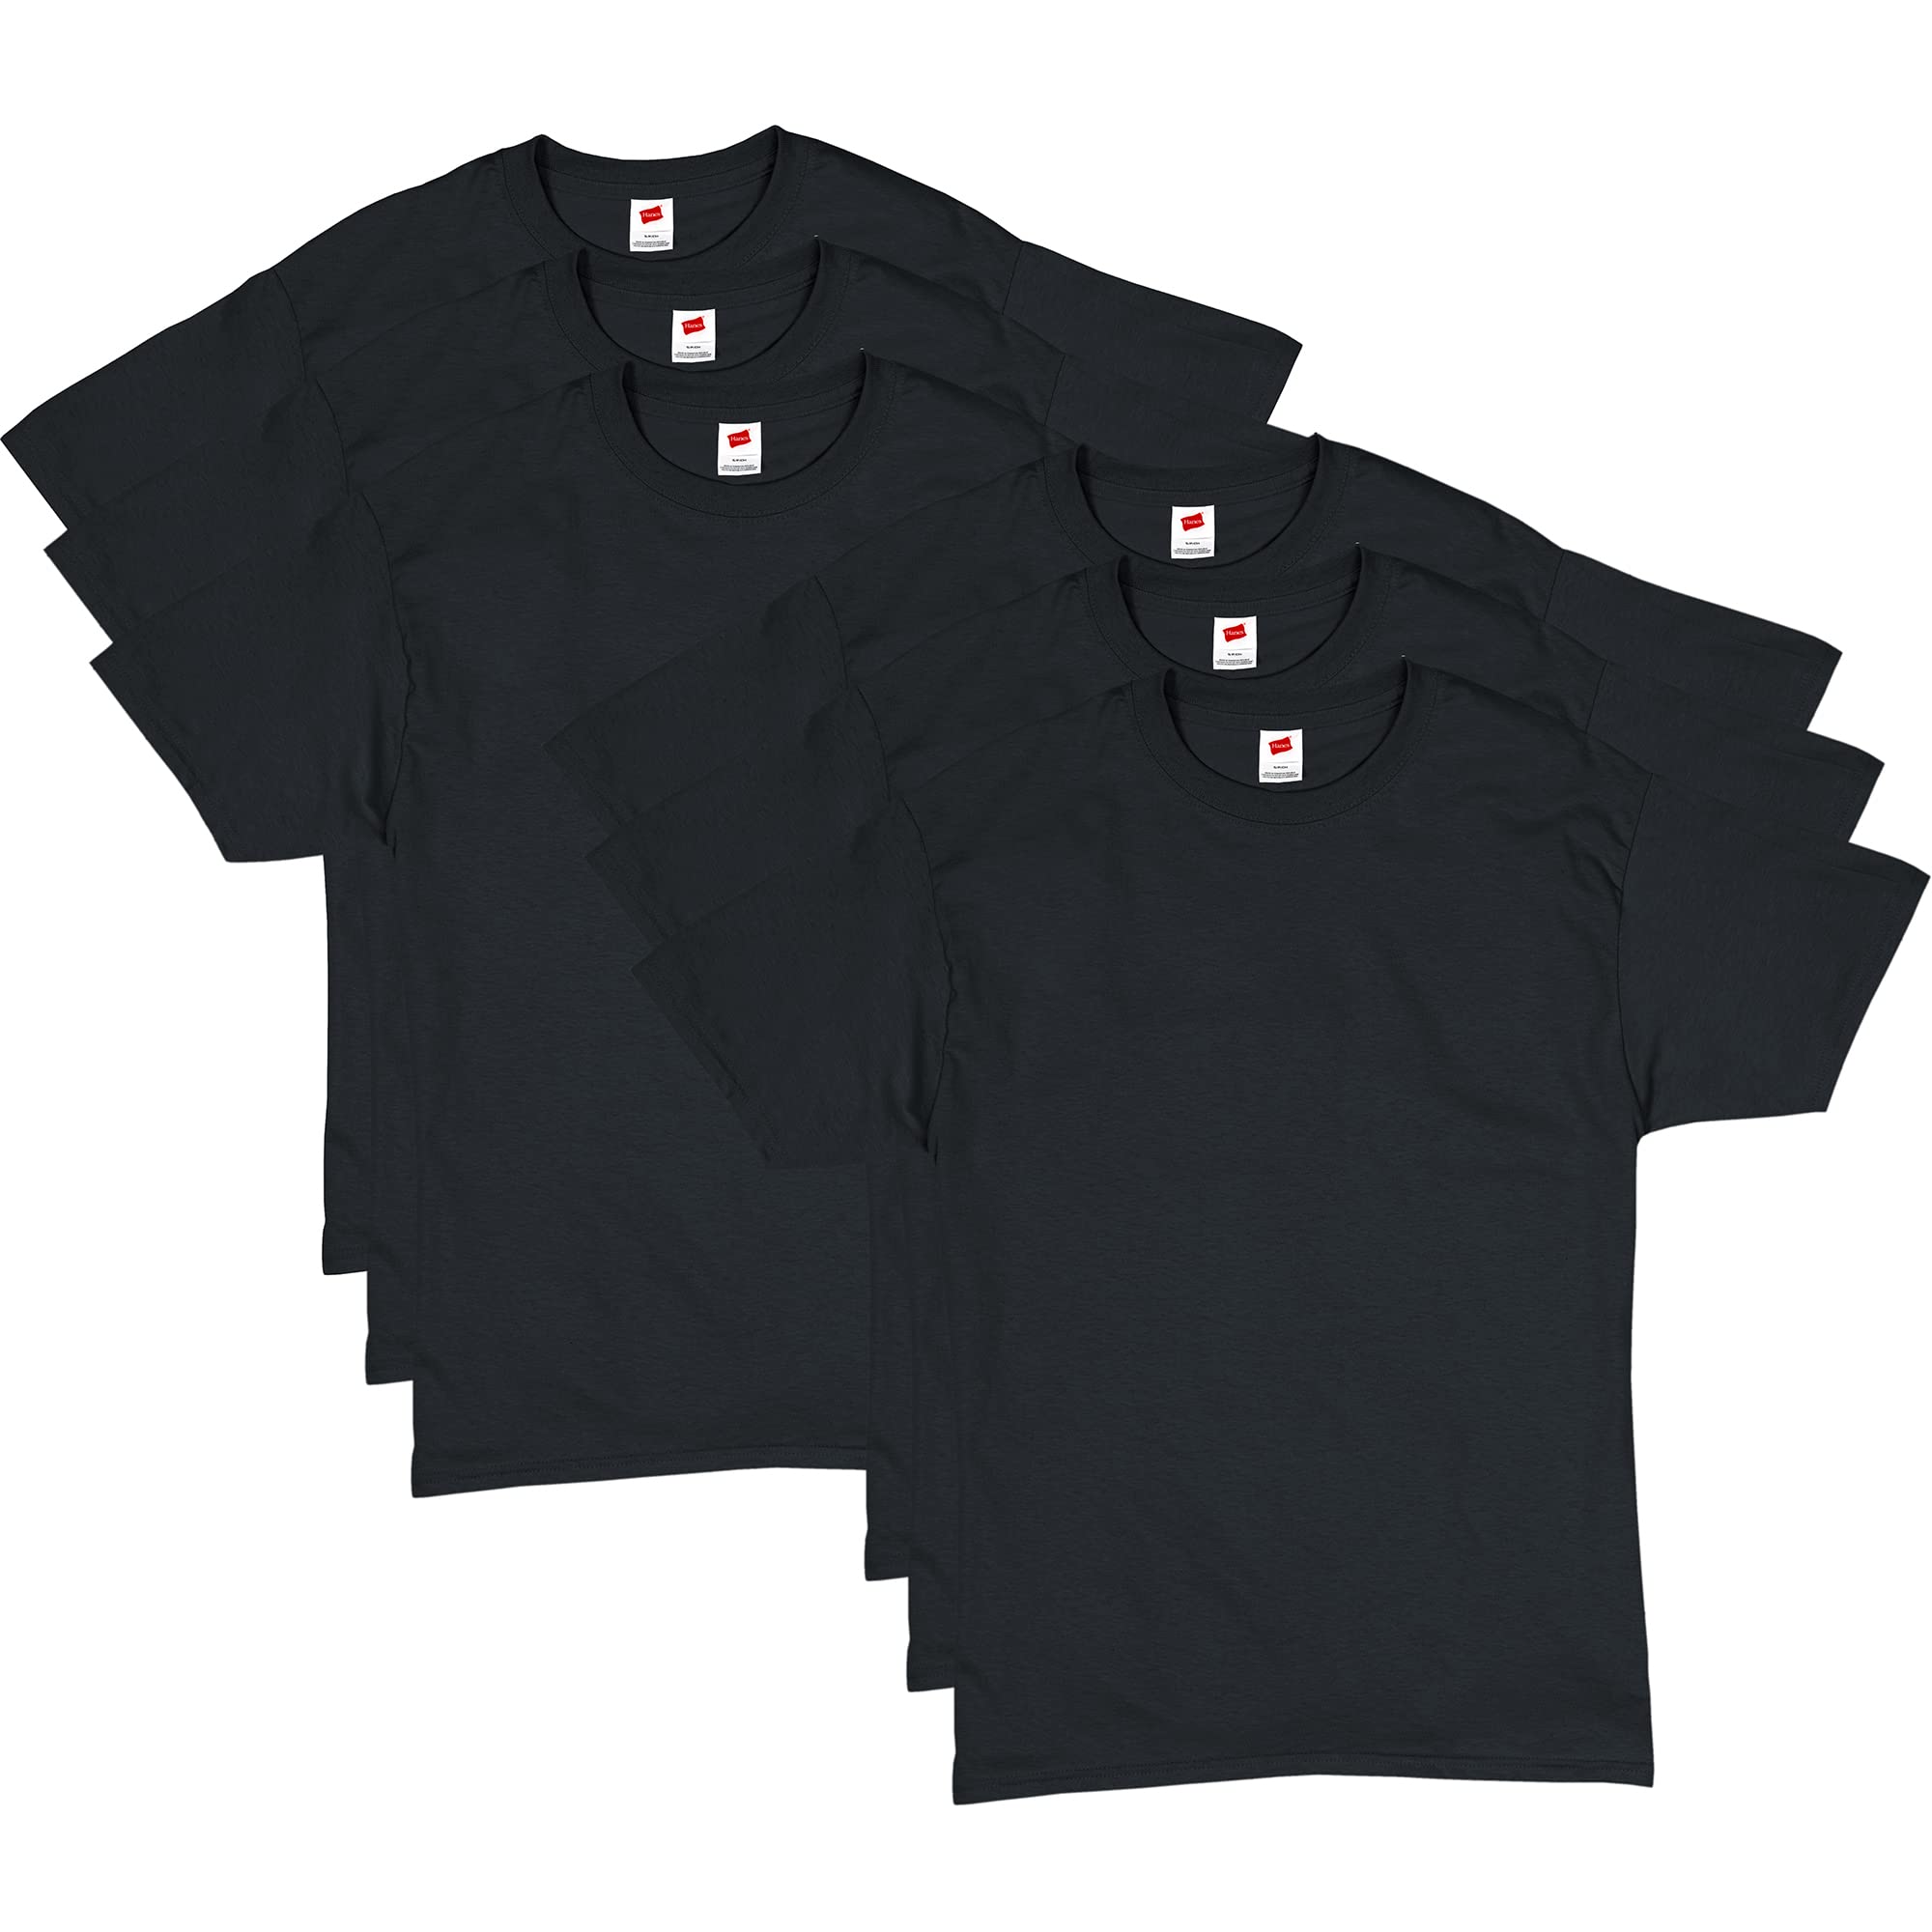 Hanes mens Essentials Short Sleeve T-shirt Value Pack (4-pack) athletic t  shirts, Black, Small US